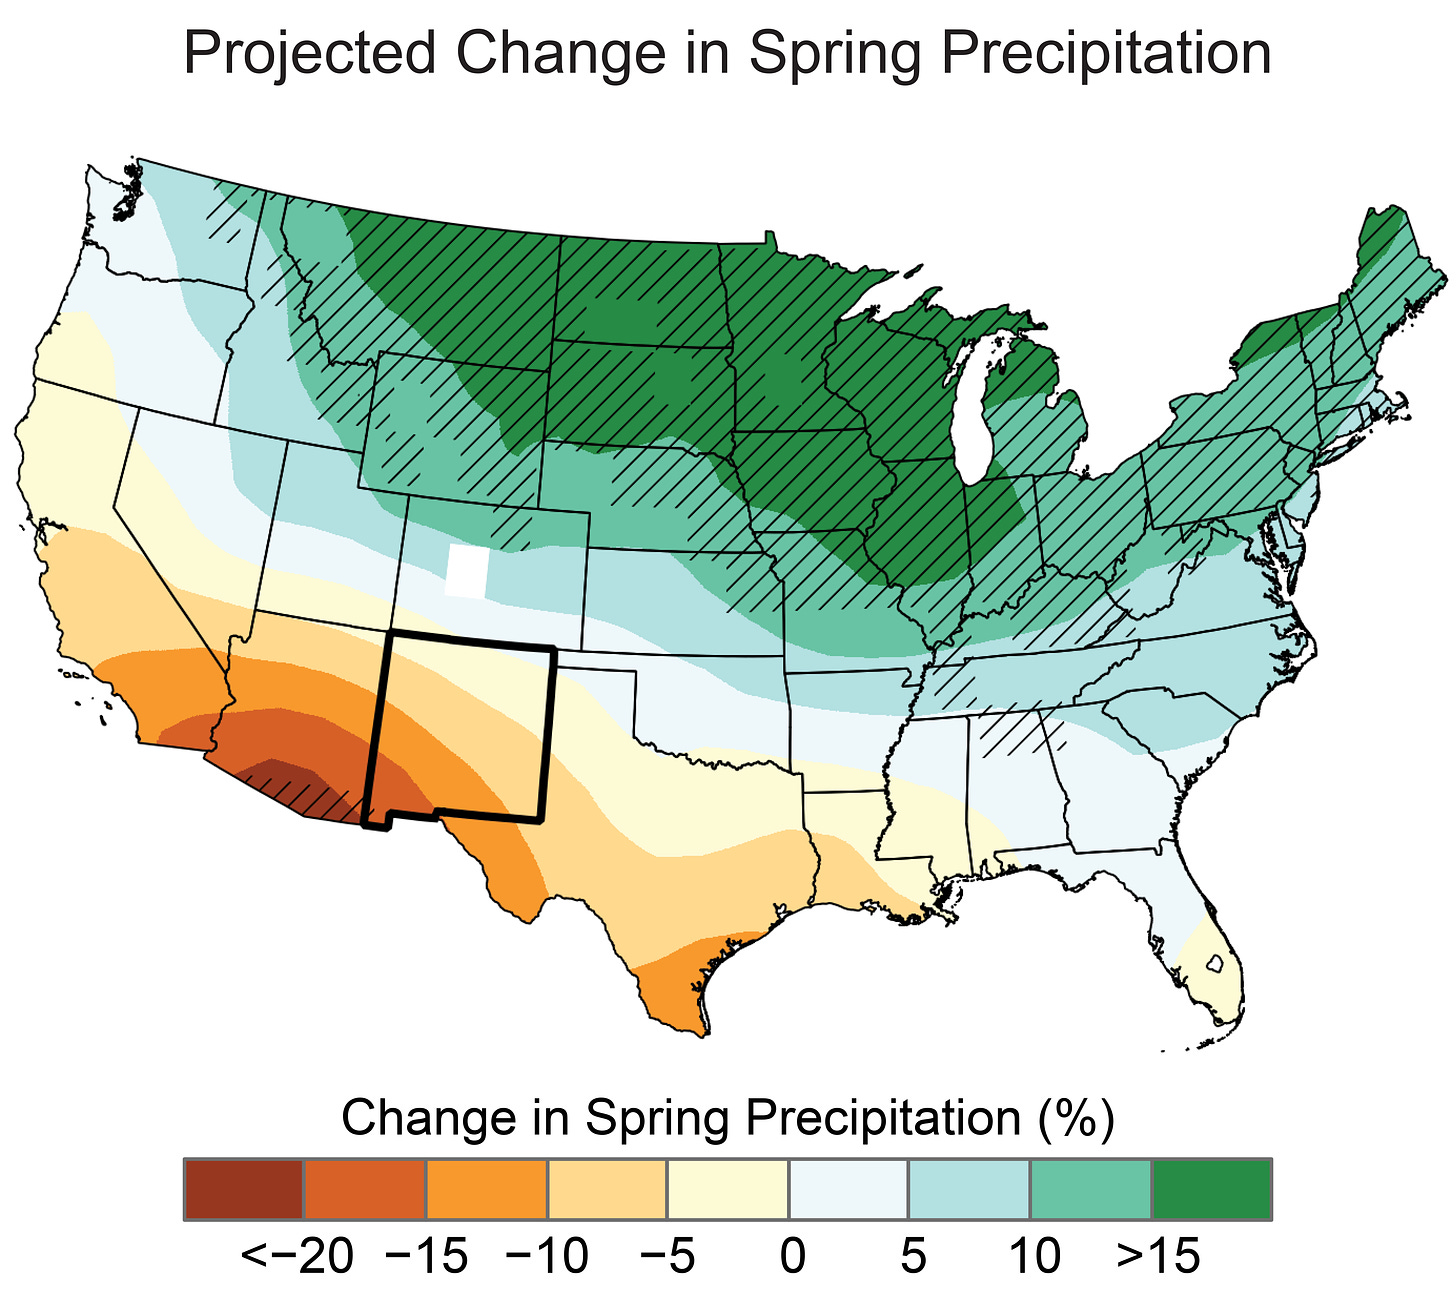 Projected Change in Spring Precipitation